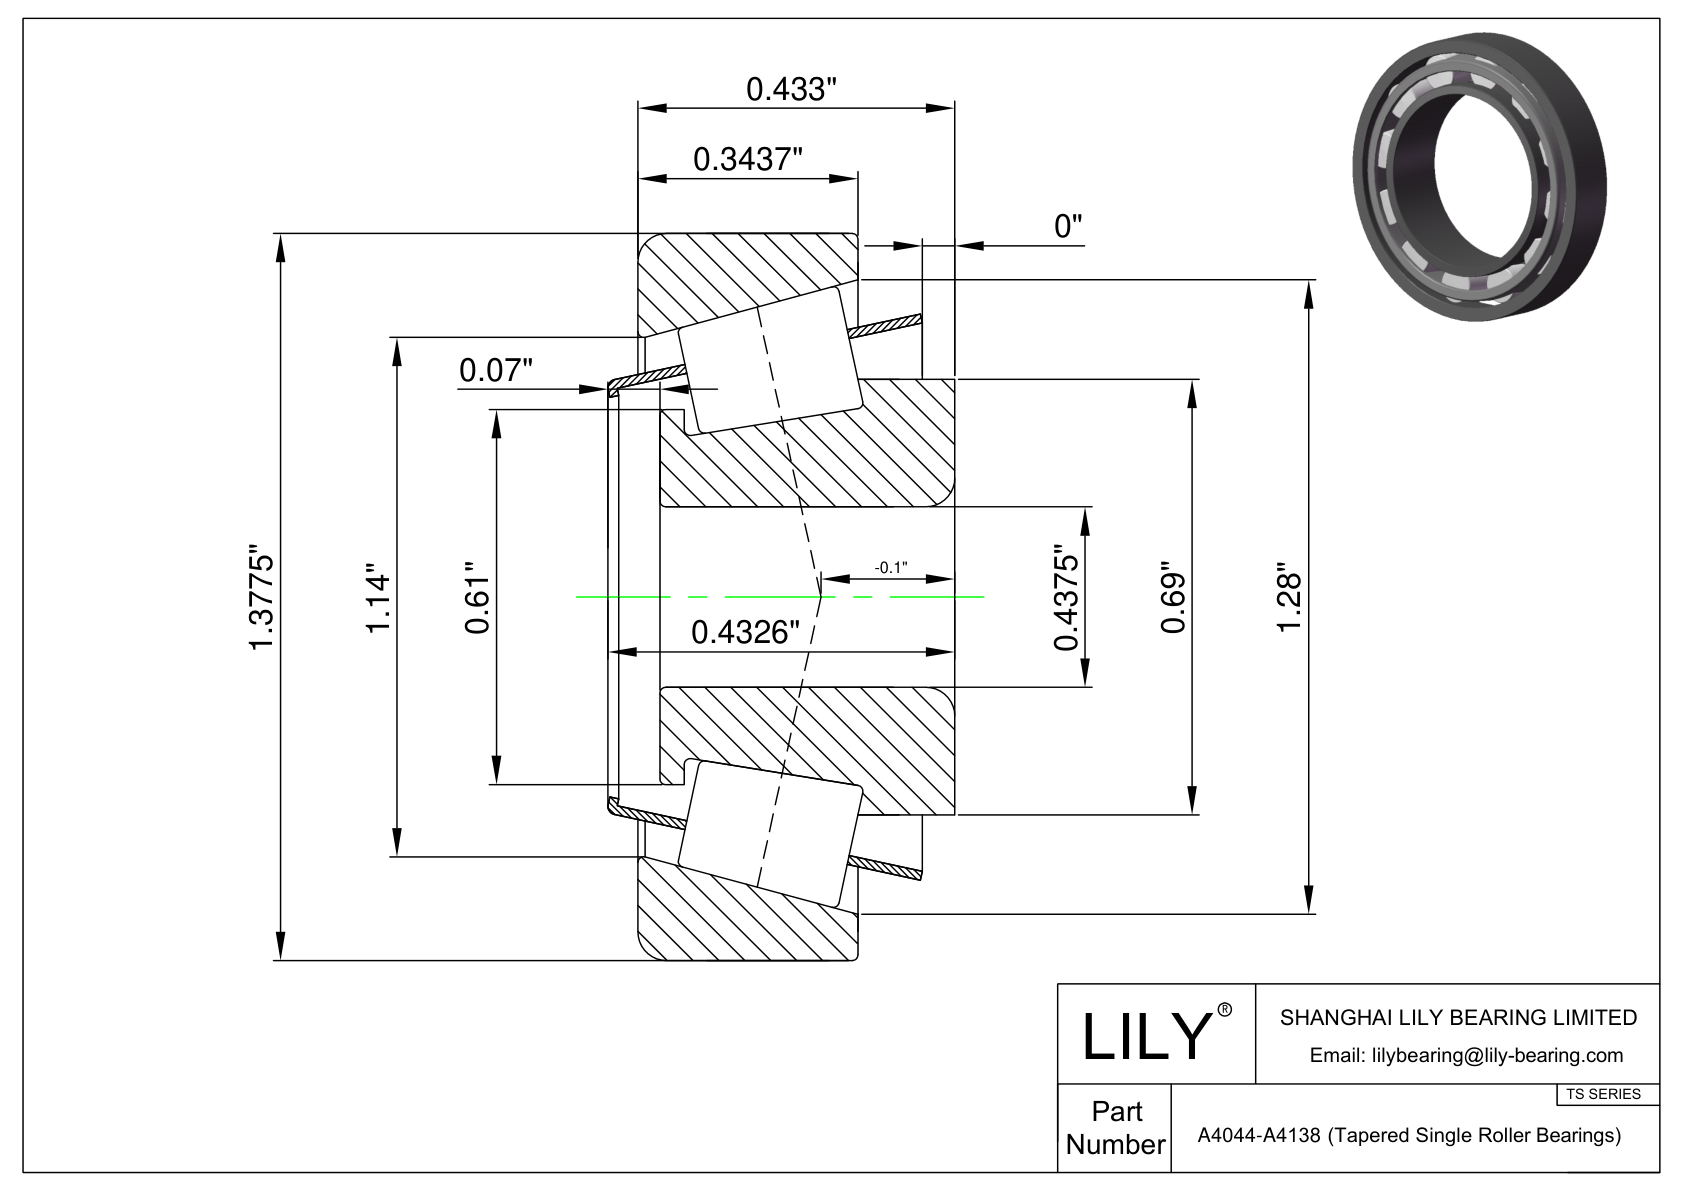 A4044-A4138 TS (Tapered Single Roller Bearings) (Imperial) cad drawing